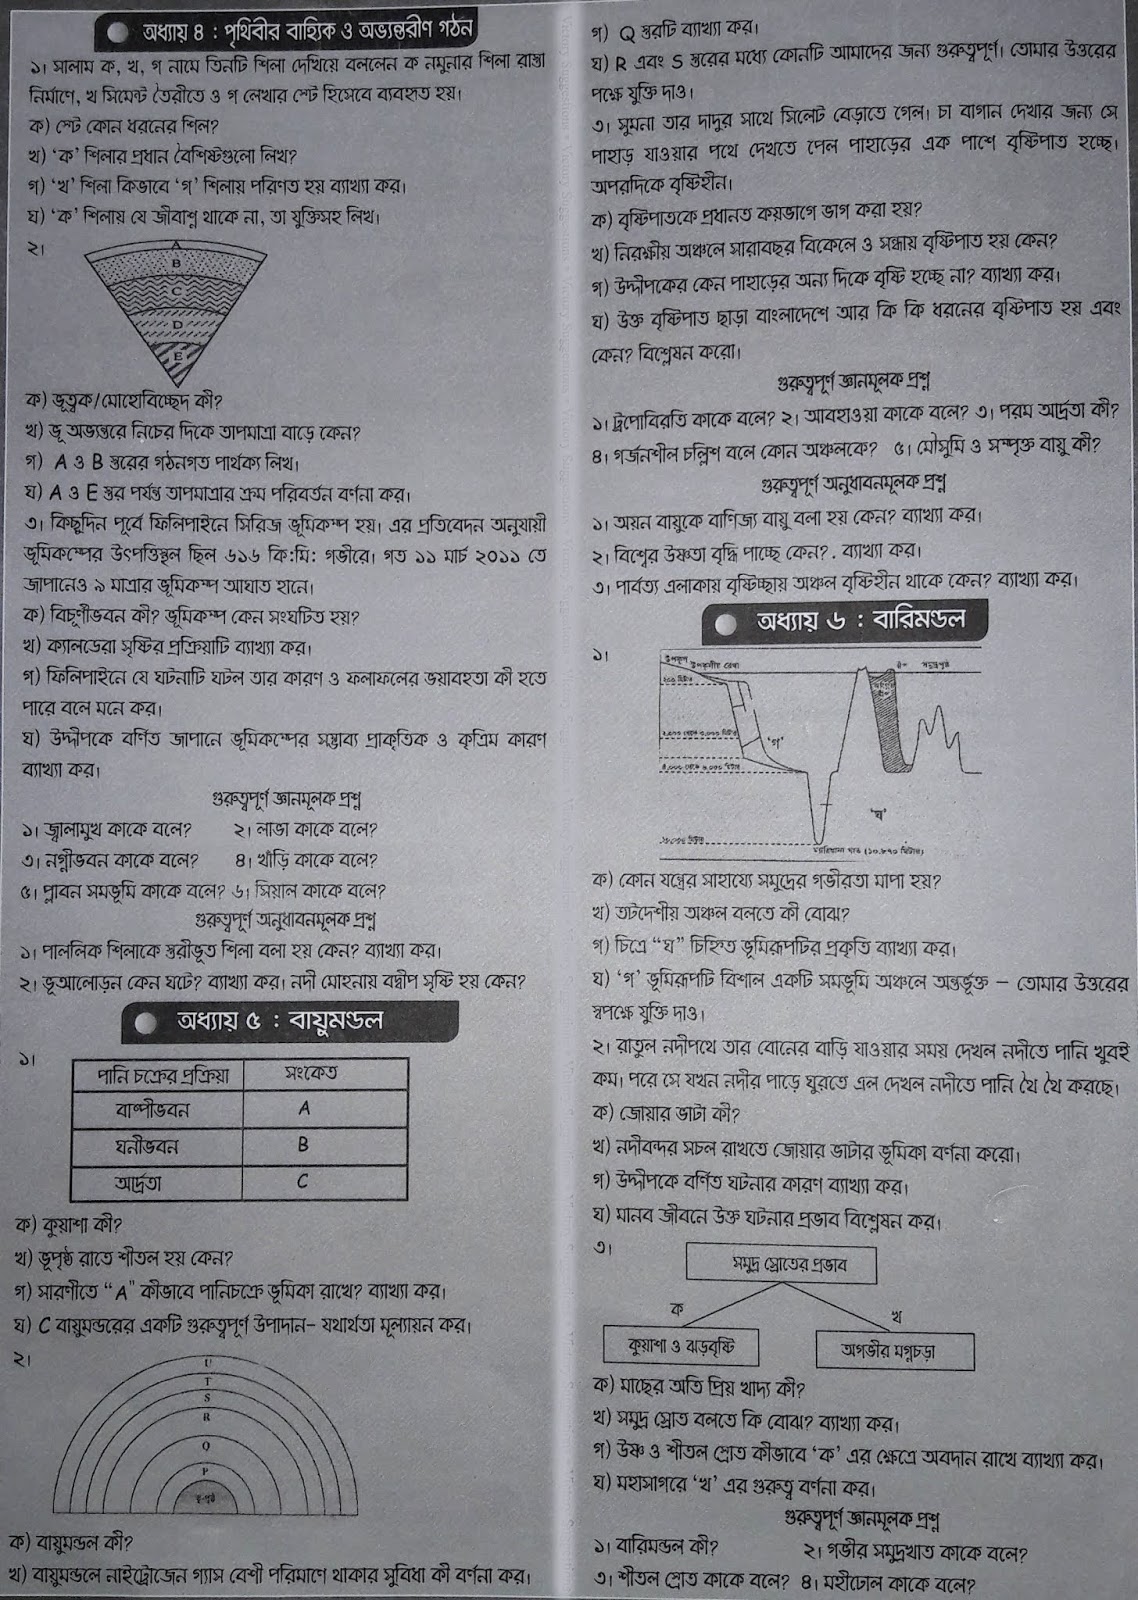 SSC Geography and Environment suggestion, question paper, model question, mcq question, question pattern, syllabus for dhaka board, all boards